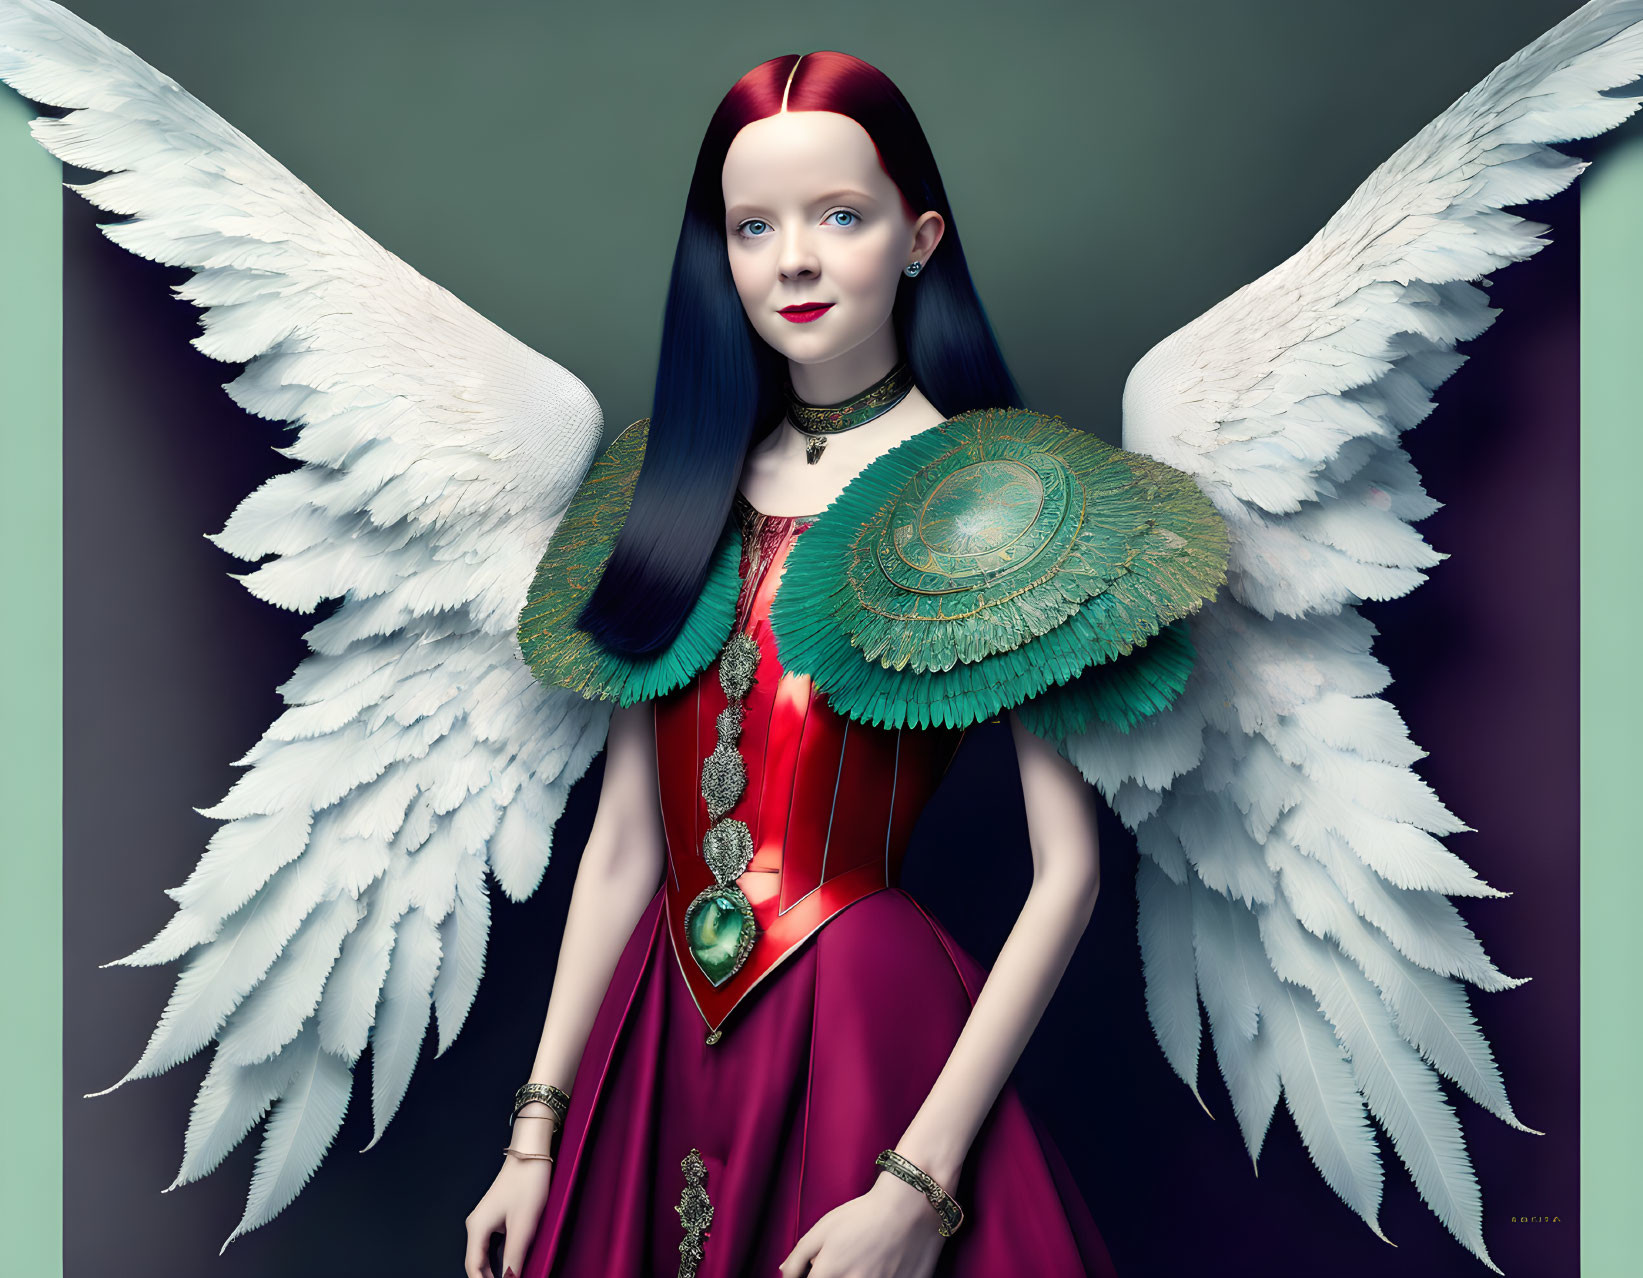 Digital Artwork: Girl with White Wings, Red Dress & Green Shoulder Pads